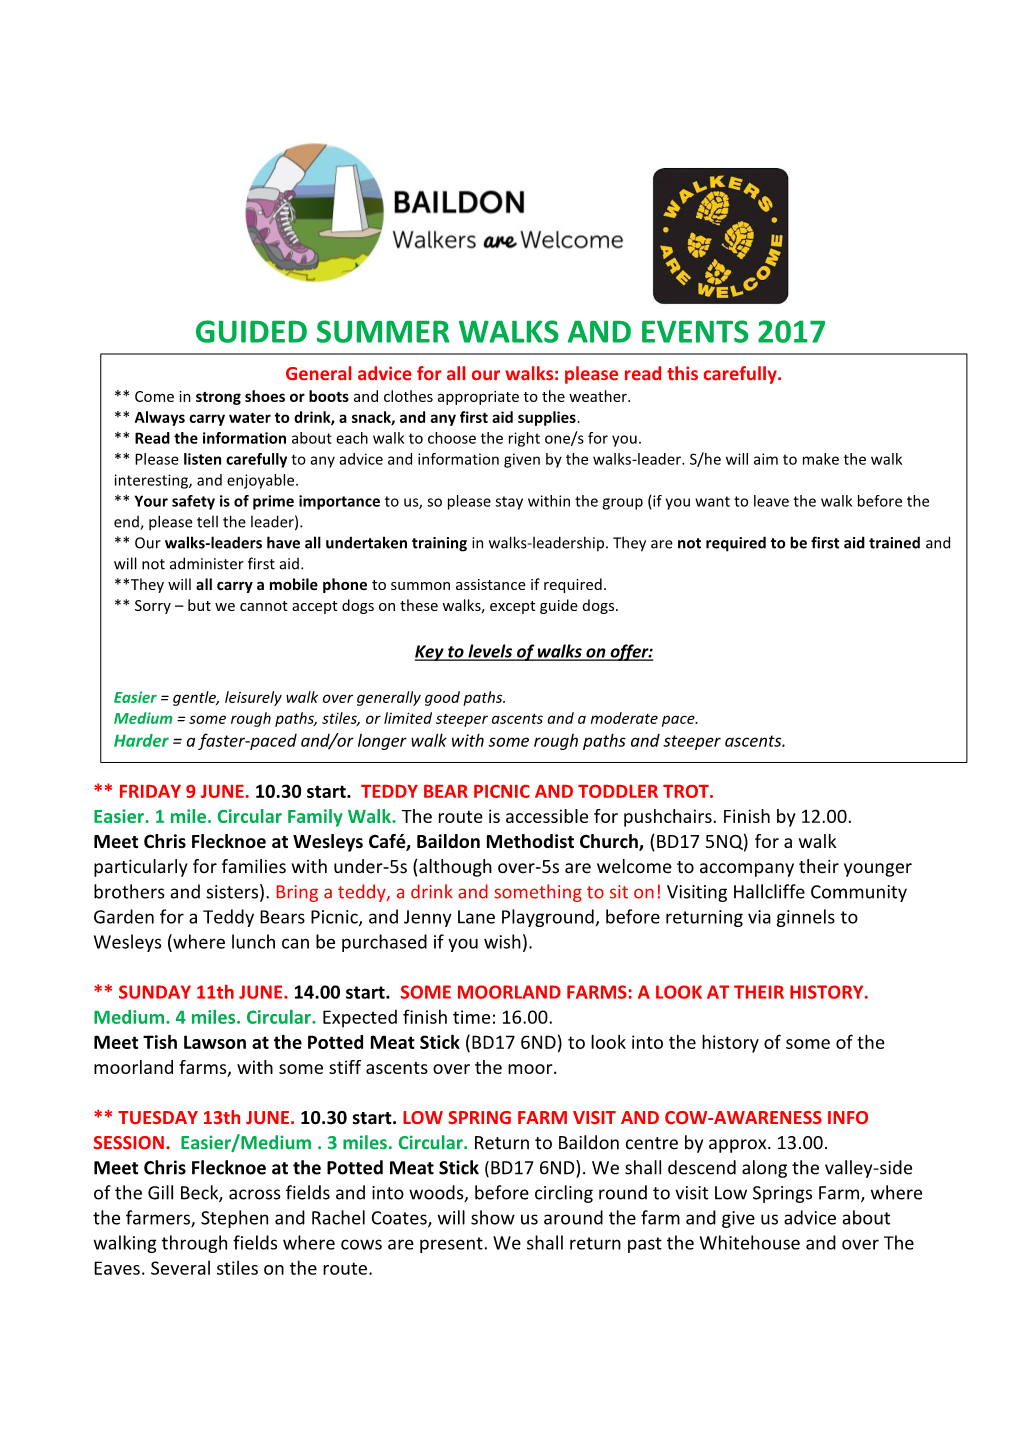 GUIDED SUMMER WALKS and EVENTS 2017 General Advice for All Our Walks: Please Read This Carefully